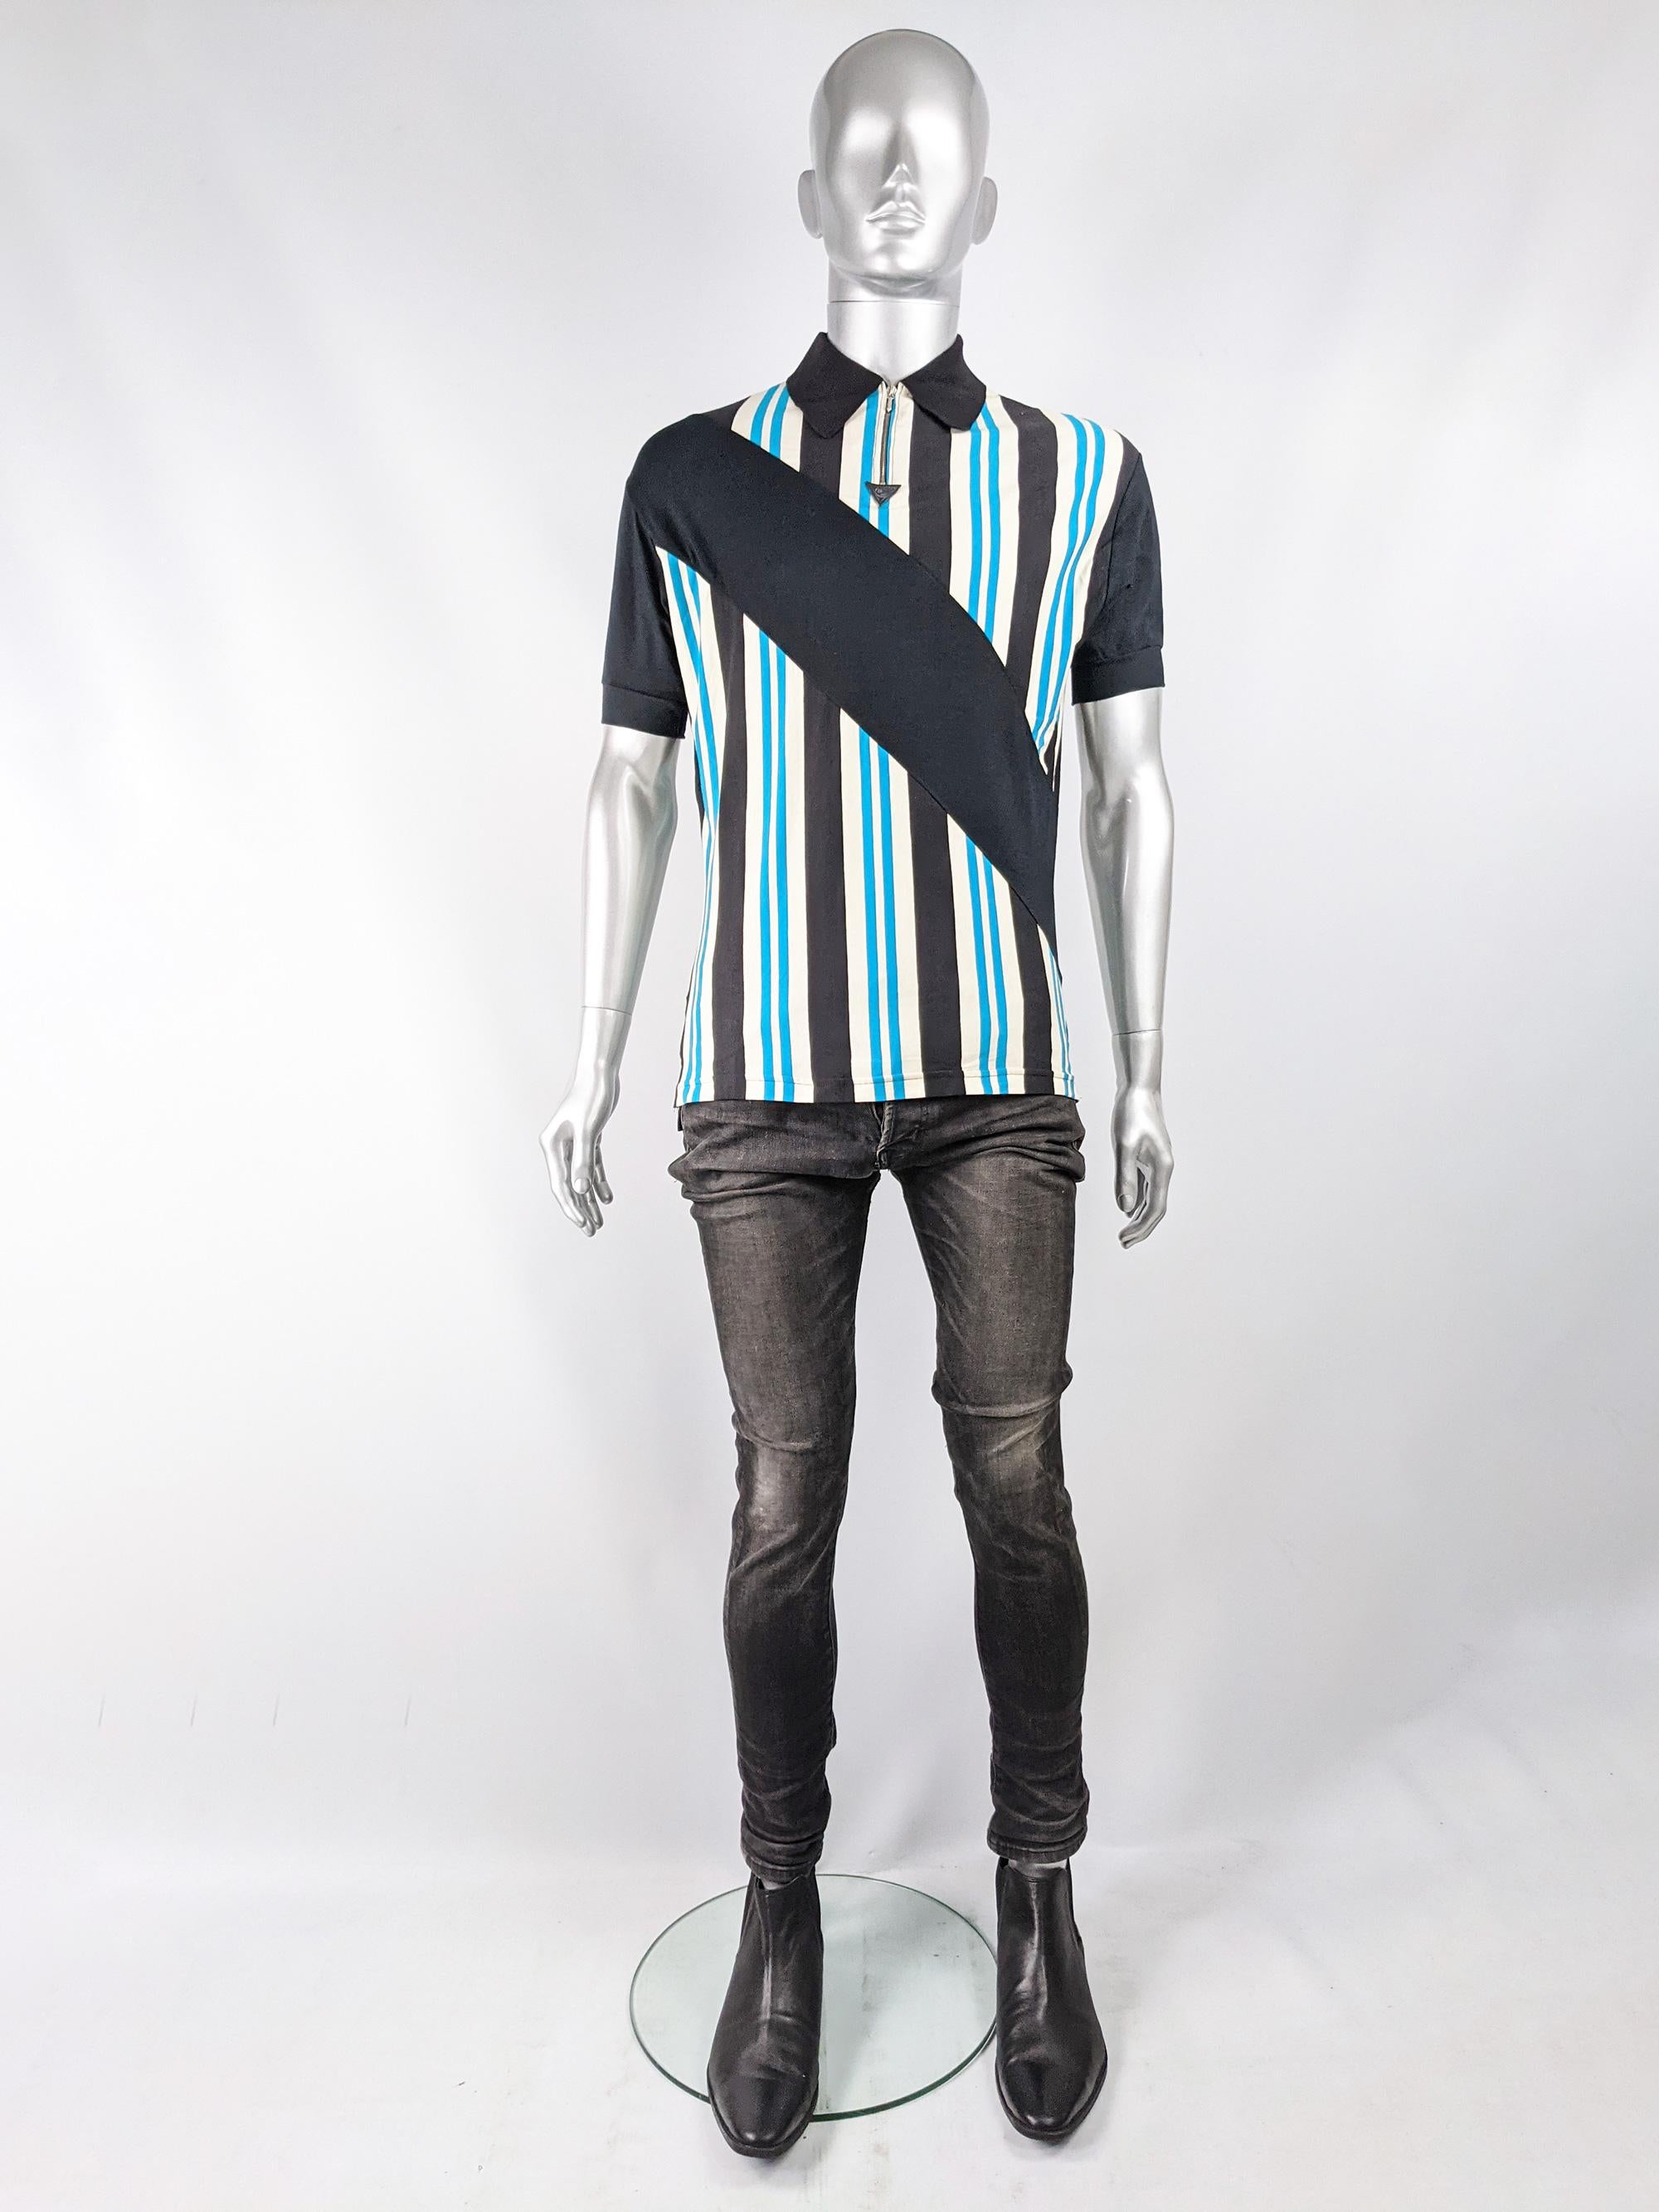 An amazing and rare vintage John Richmond mens shirt for the Destroy line. In a blue, cream and black cotton and lycra jersey with a zip up collar and a bold stripe diagonal across the chest. 

Size: Marked M
Chest - 42” / 106cm 
Waist - 34” /